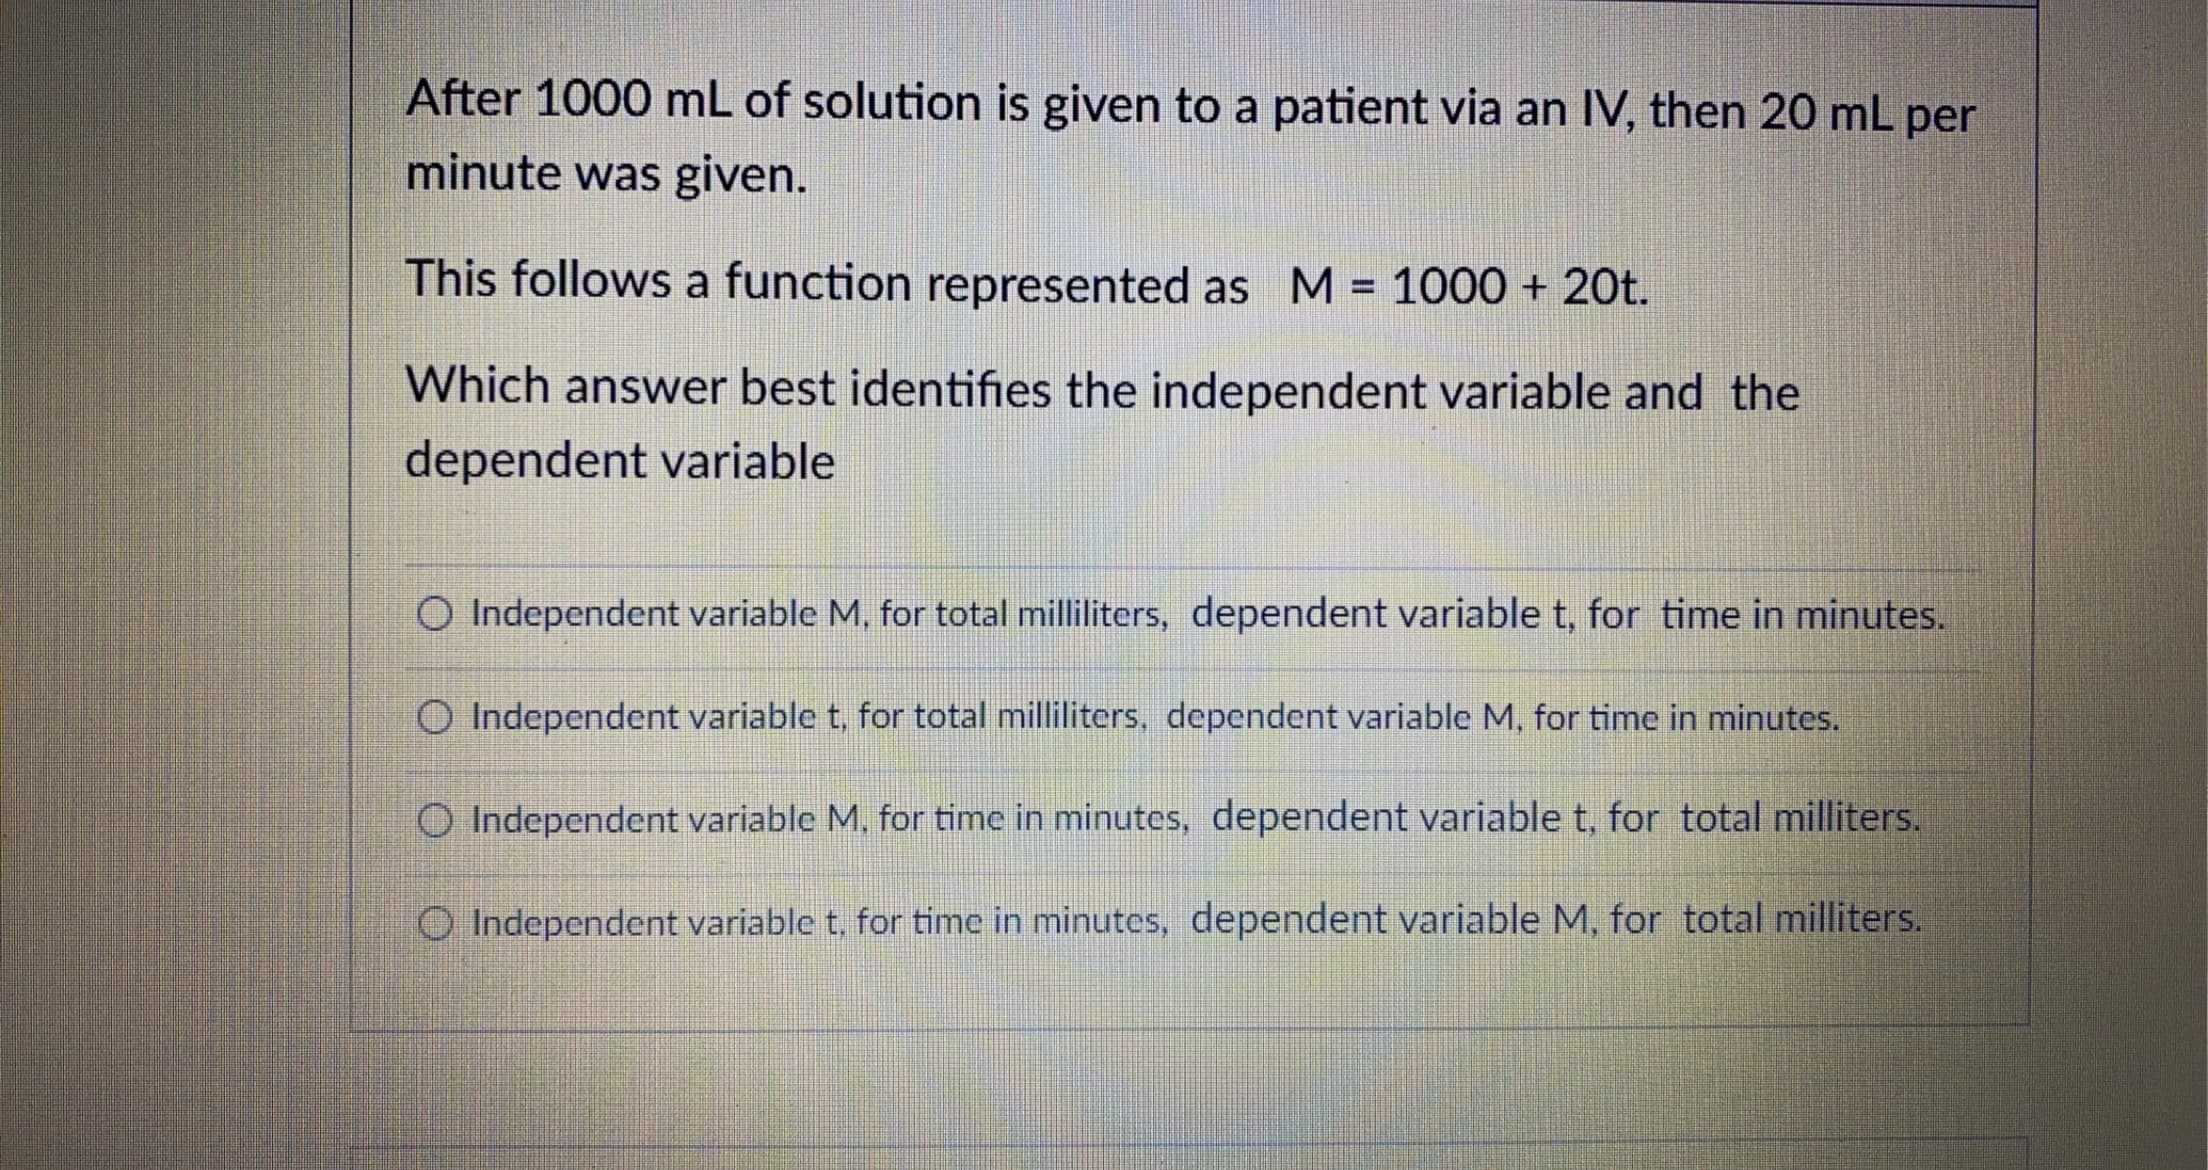 After 1000 mL of solution is given to a patient via an IV, then 20 mL per
minute was given.
This follows a function represented as M = 1000 + 20t.
%3D
Which answer best identifies the independent variable and the
dependent variable
O Independent variable M, for total milliliters, dependent variable t, for time in minutes.
O Independent variable t, for total milliliters, dependent variable M, for time in minutes.
O Independent variable M, for time in minutes, dependent variable t, for total milliters.
O Independent variable t, for time in minutes, dependent variable M, for total milliters.
